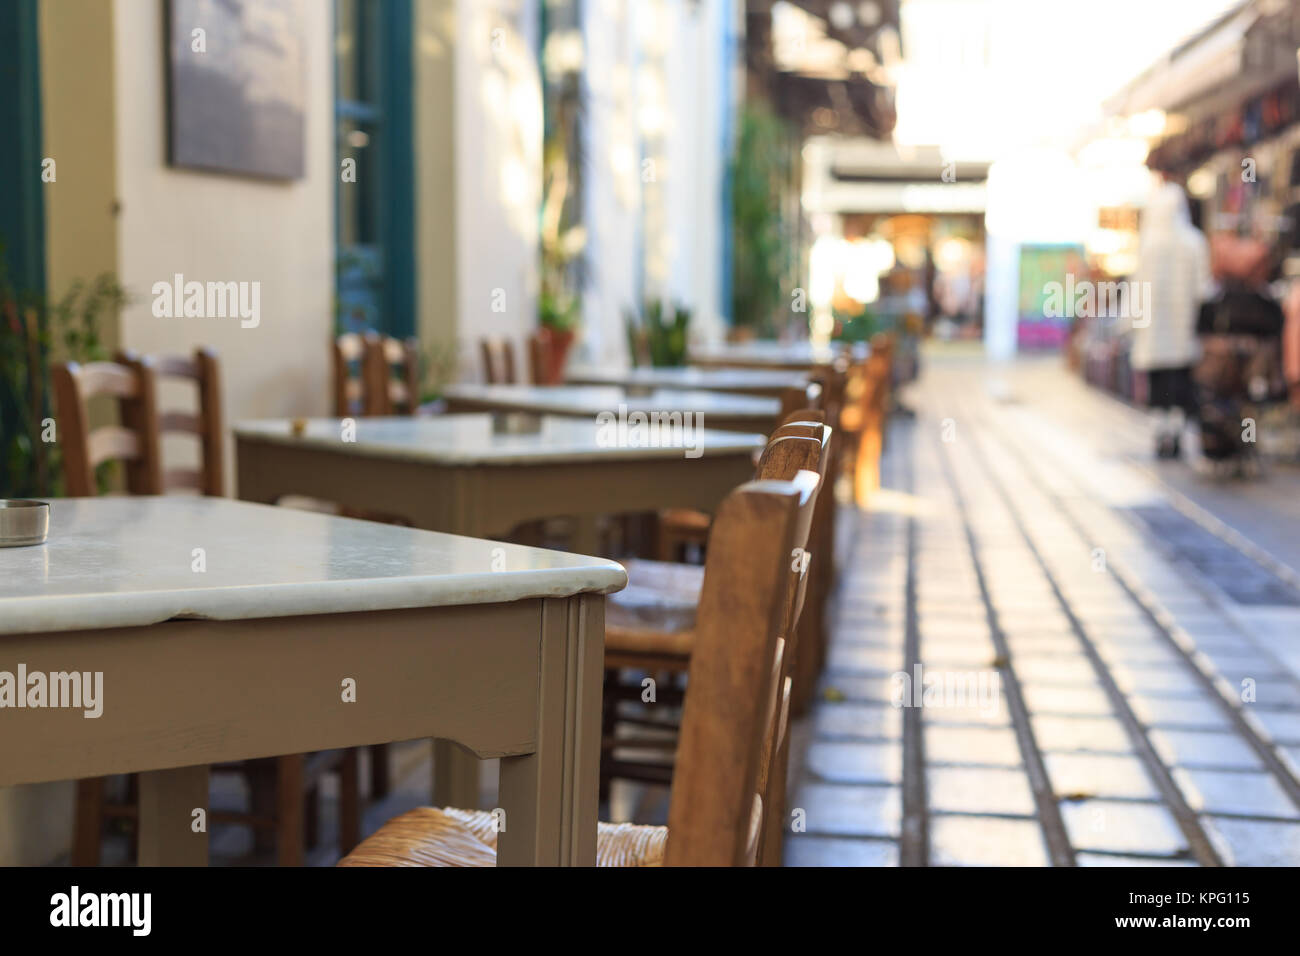 Athens, Greece. Greek tavern empty tables and chairs in a row, blur pedestrian and market background Stock Photo